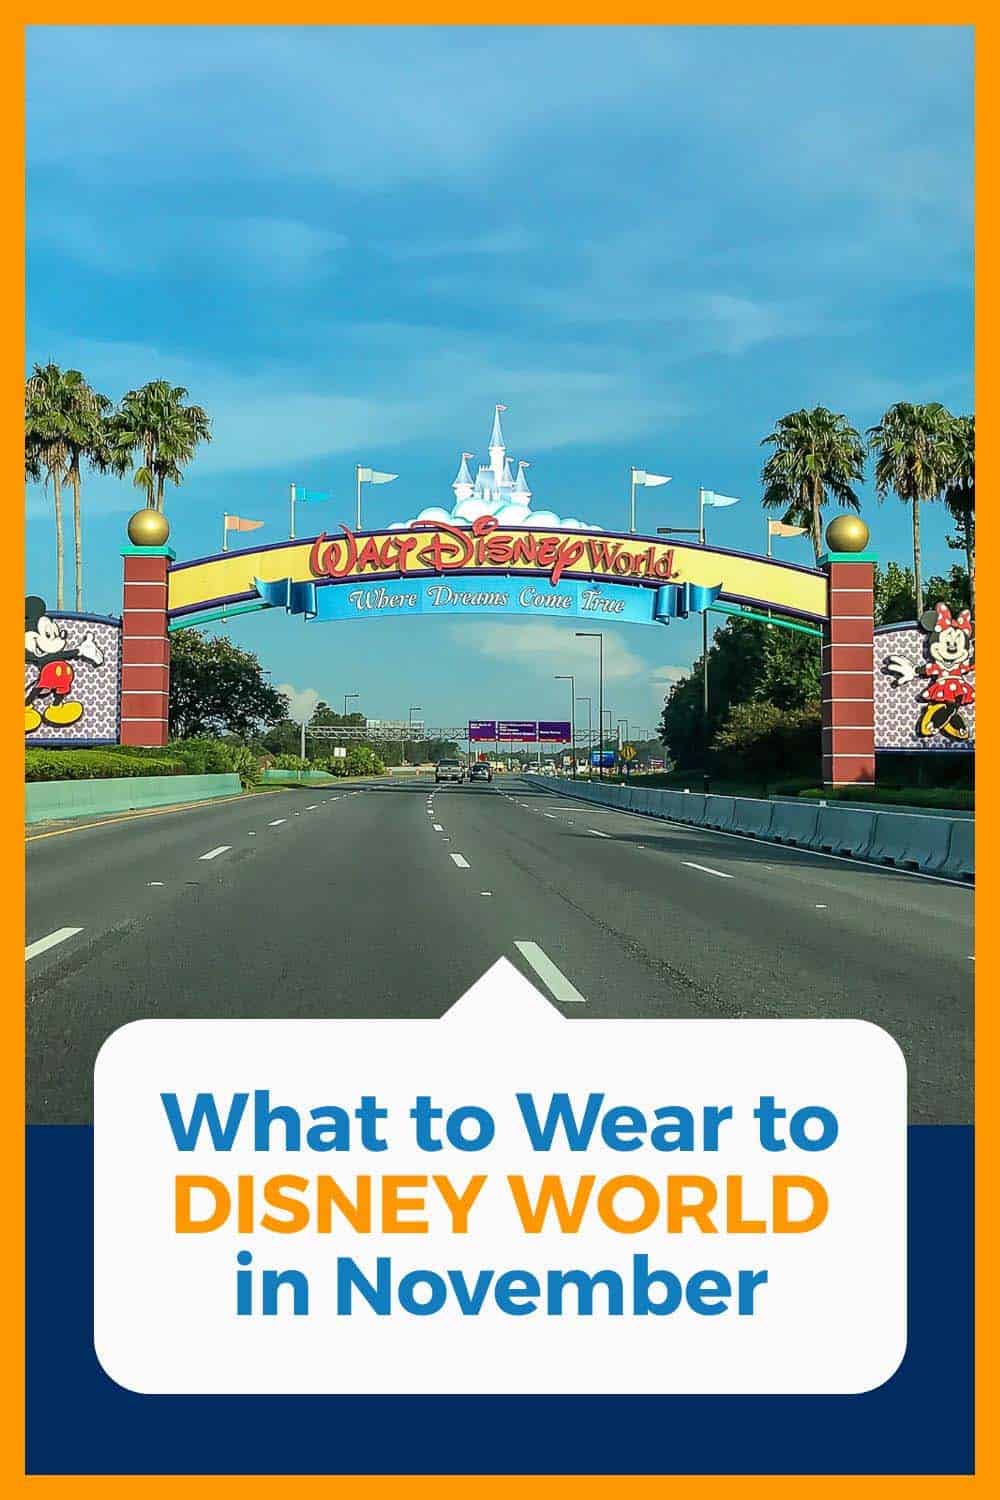 What to Wear to Disney World in November